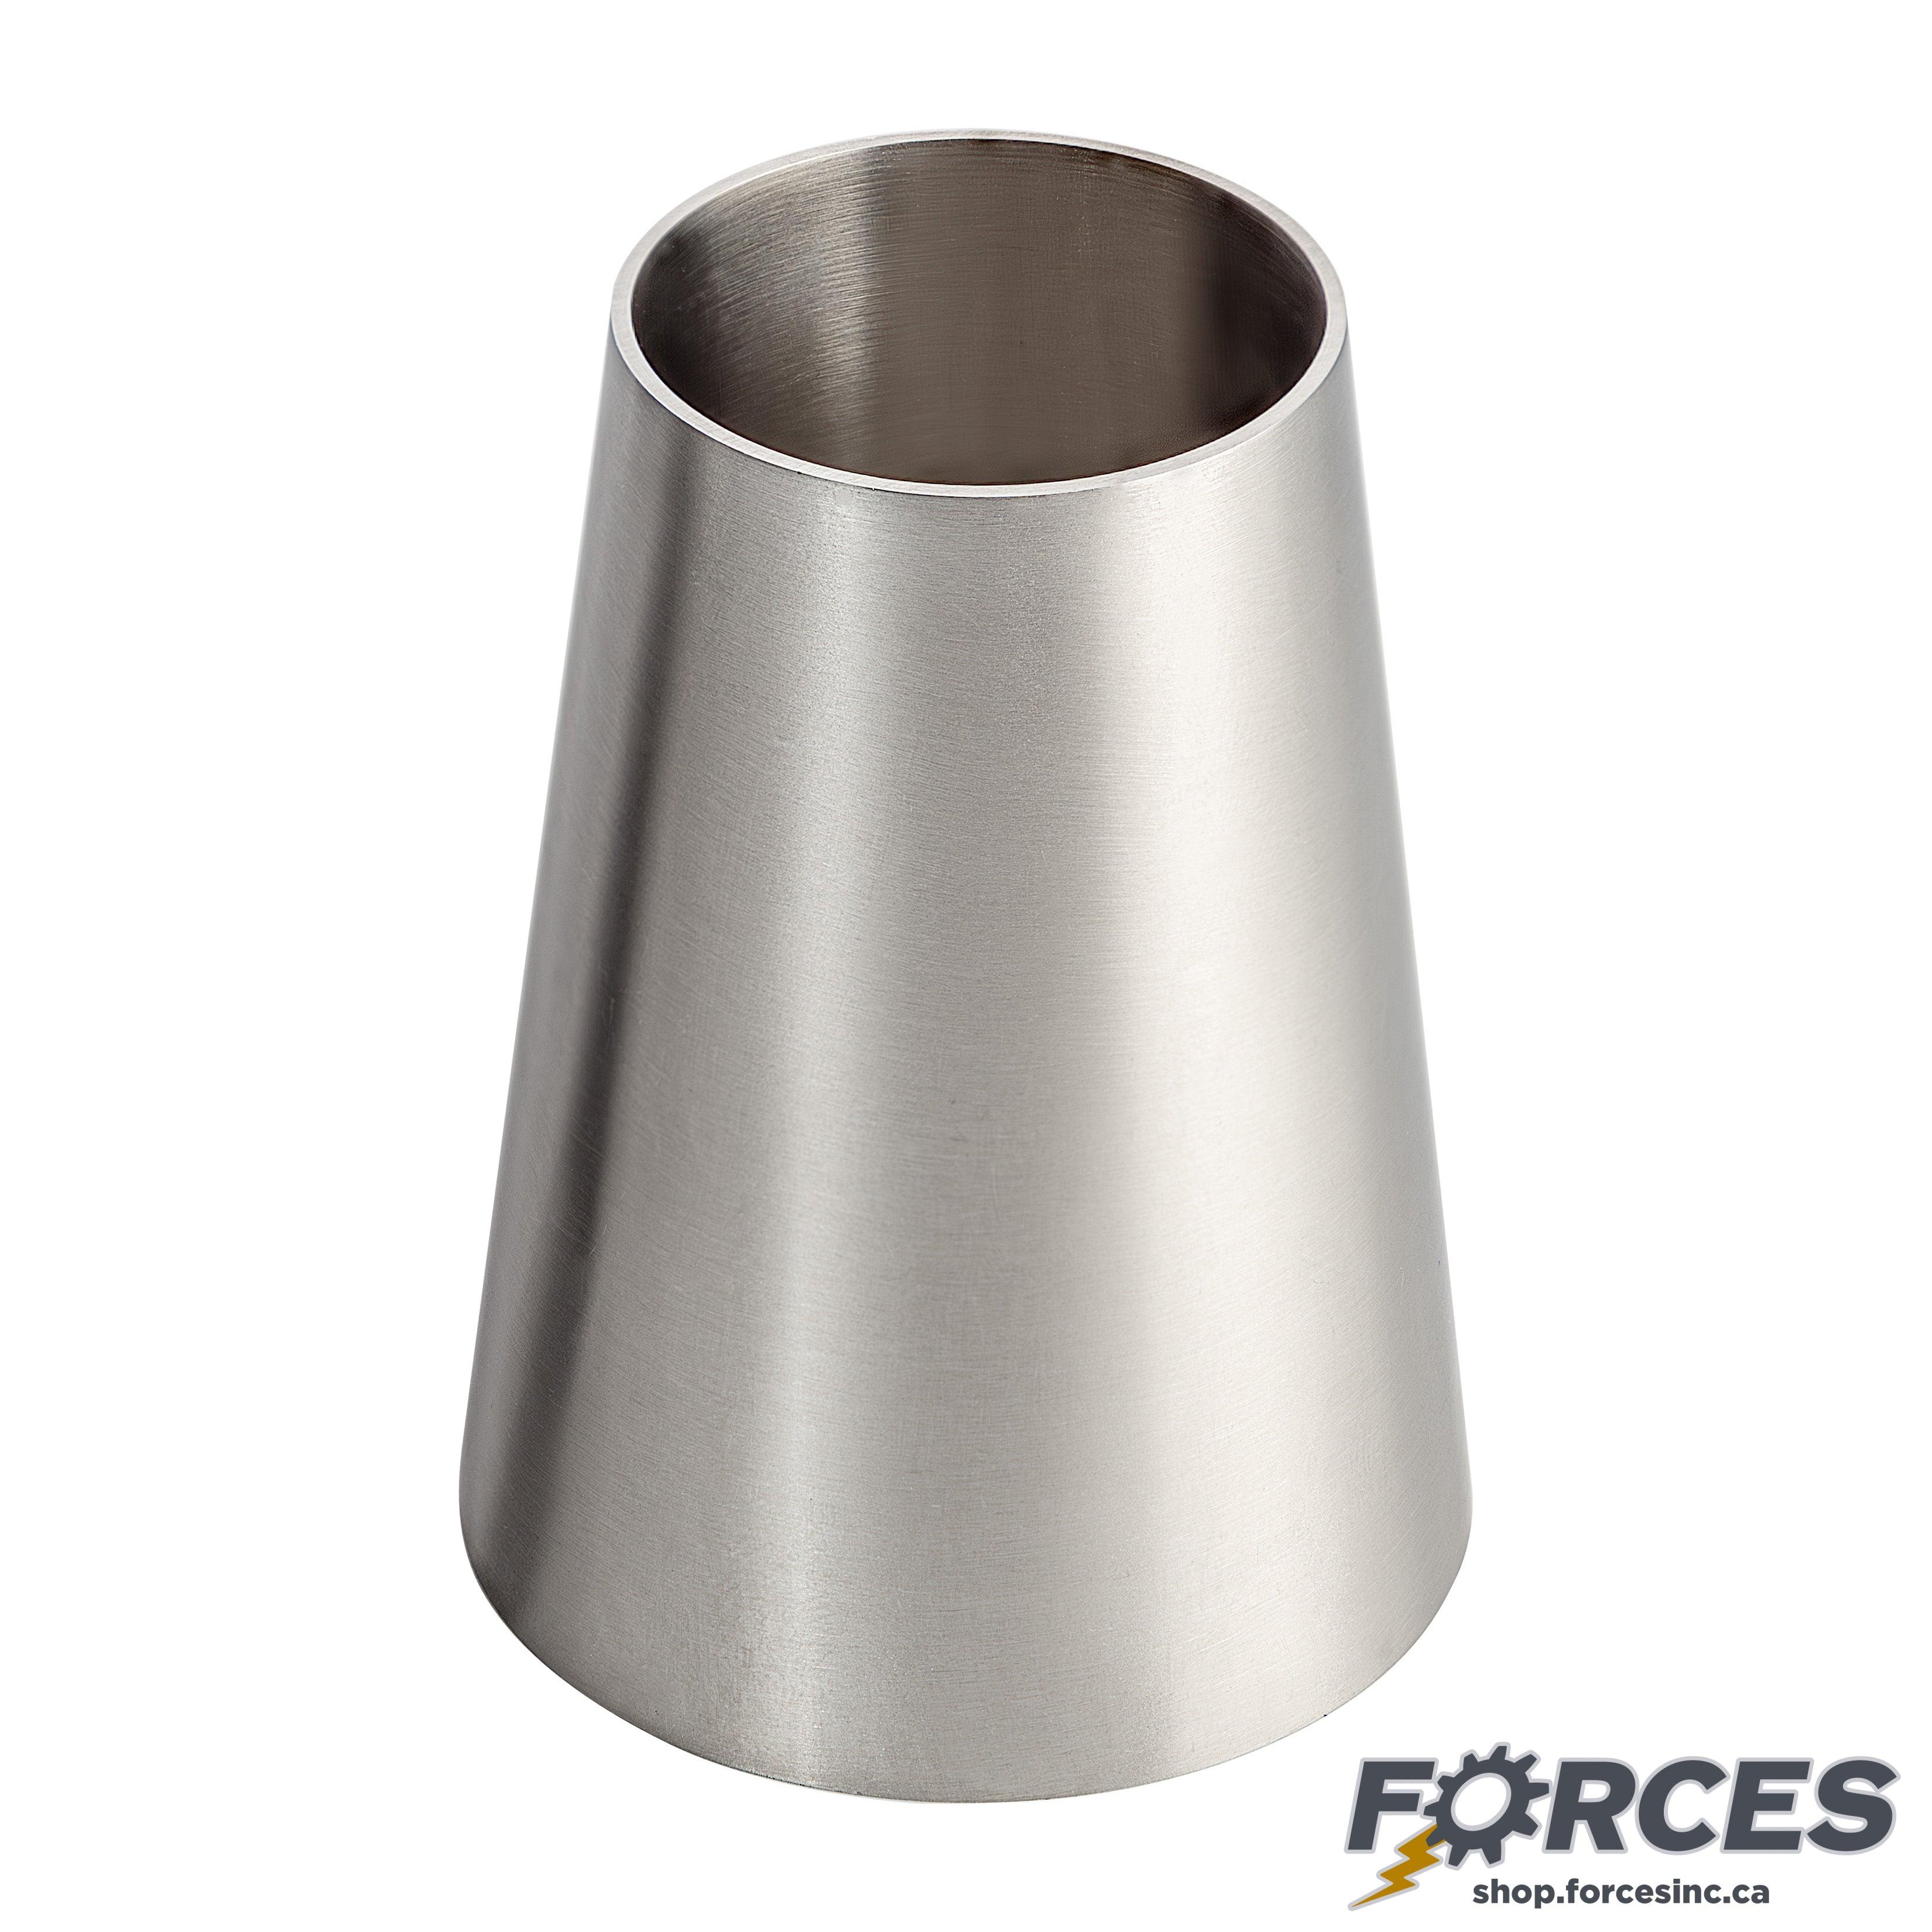 3" x 2-1/2" Butt Weld Concentric Reducer - Stainless Steel 316 - Forces Inc